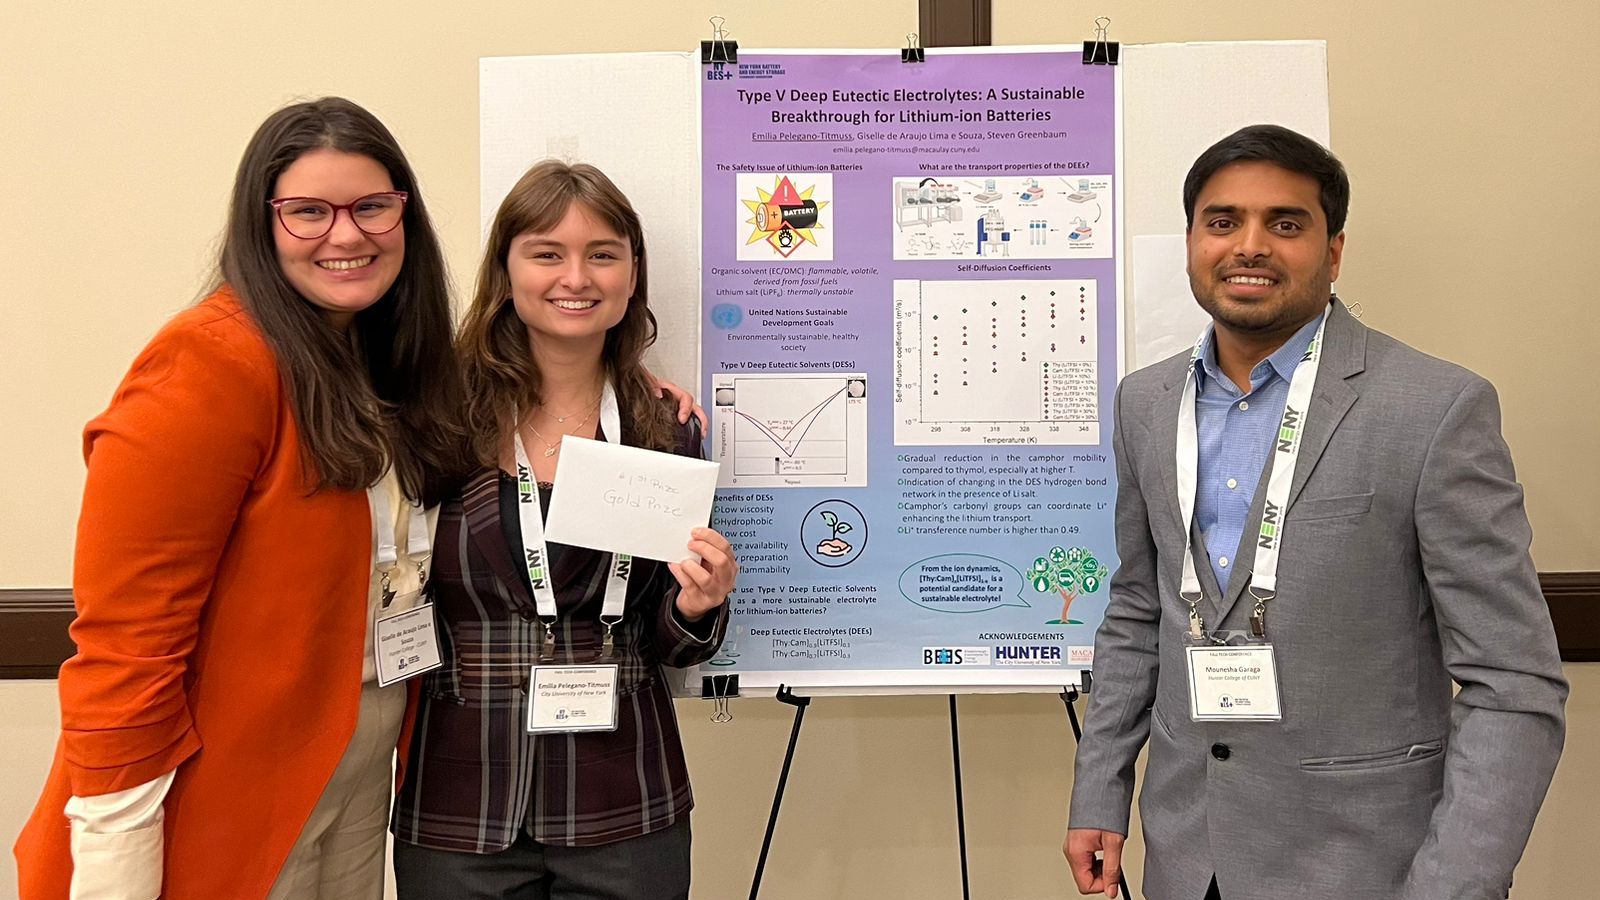 Emilia Pelegano-Titmuss, poses with her poster flanked by Research Associates Dr. Giselle Araujo and Dr. Mounesha Garaga.